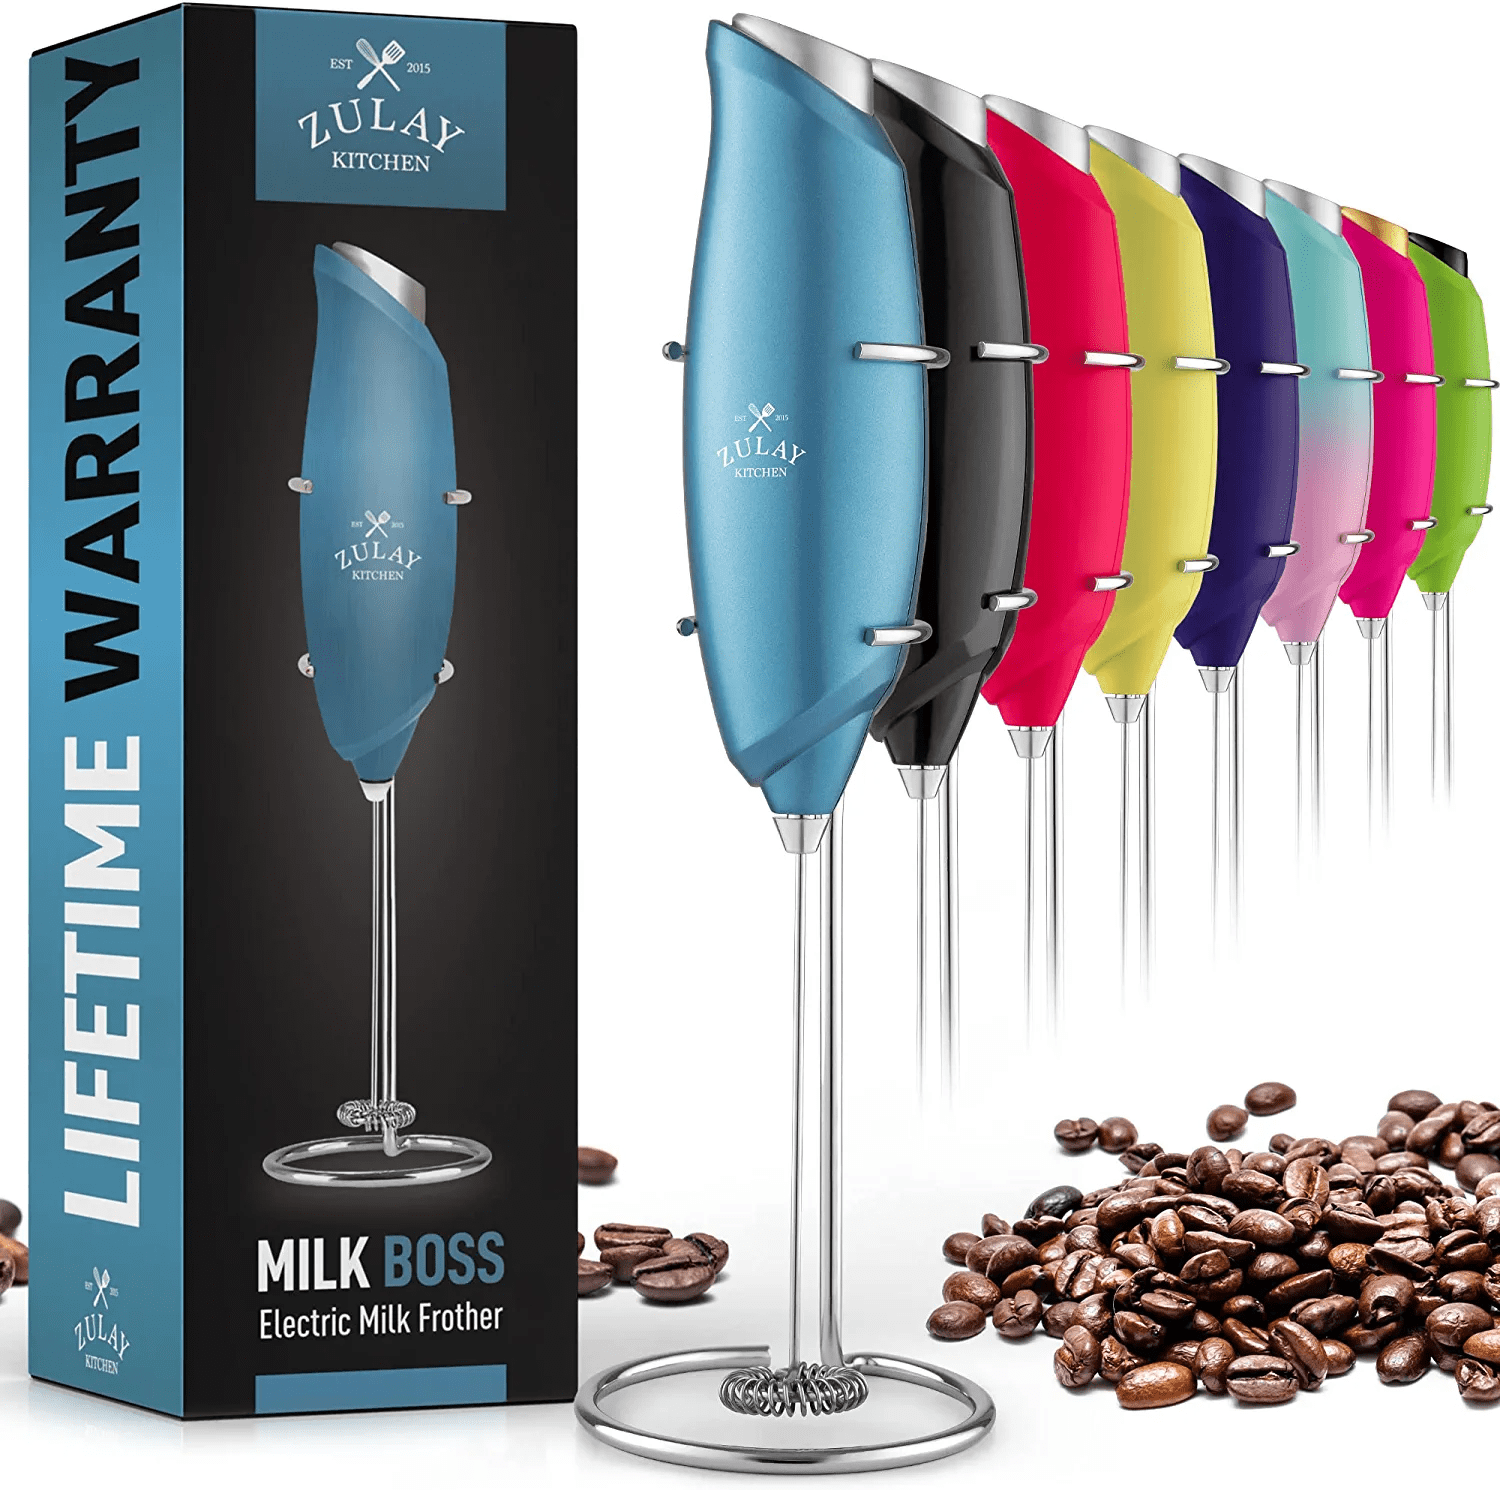 Zulay Kitchen Premium One-Touch Milk Frother for Coffee - Metallic Ice Blue